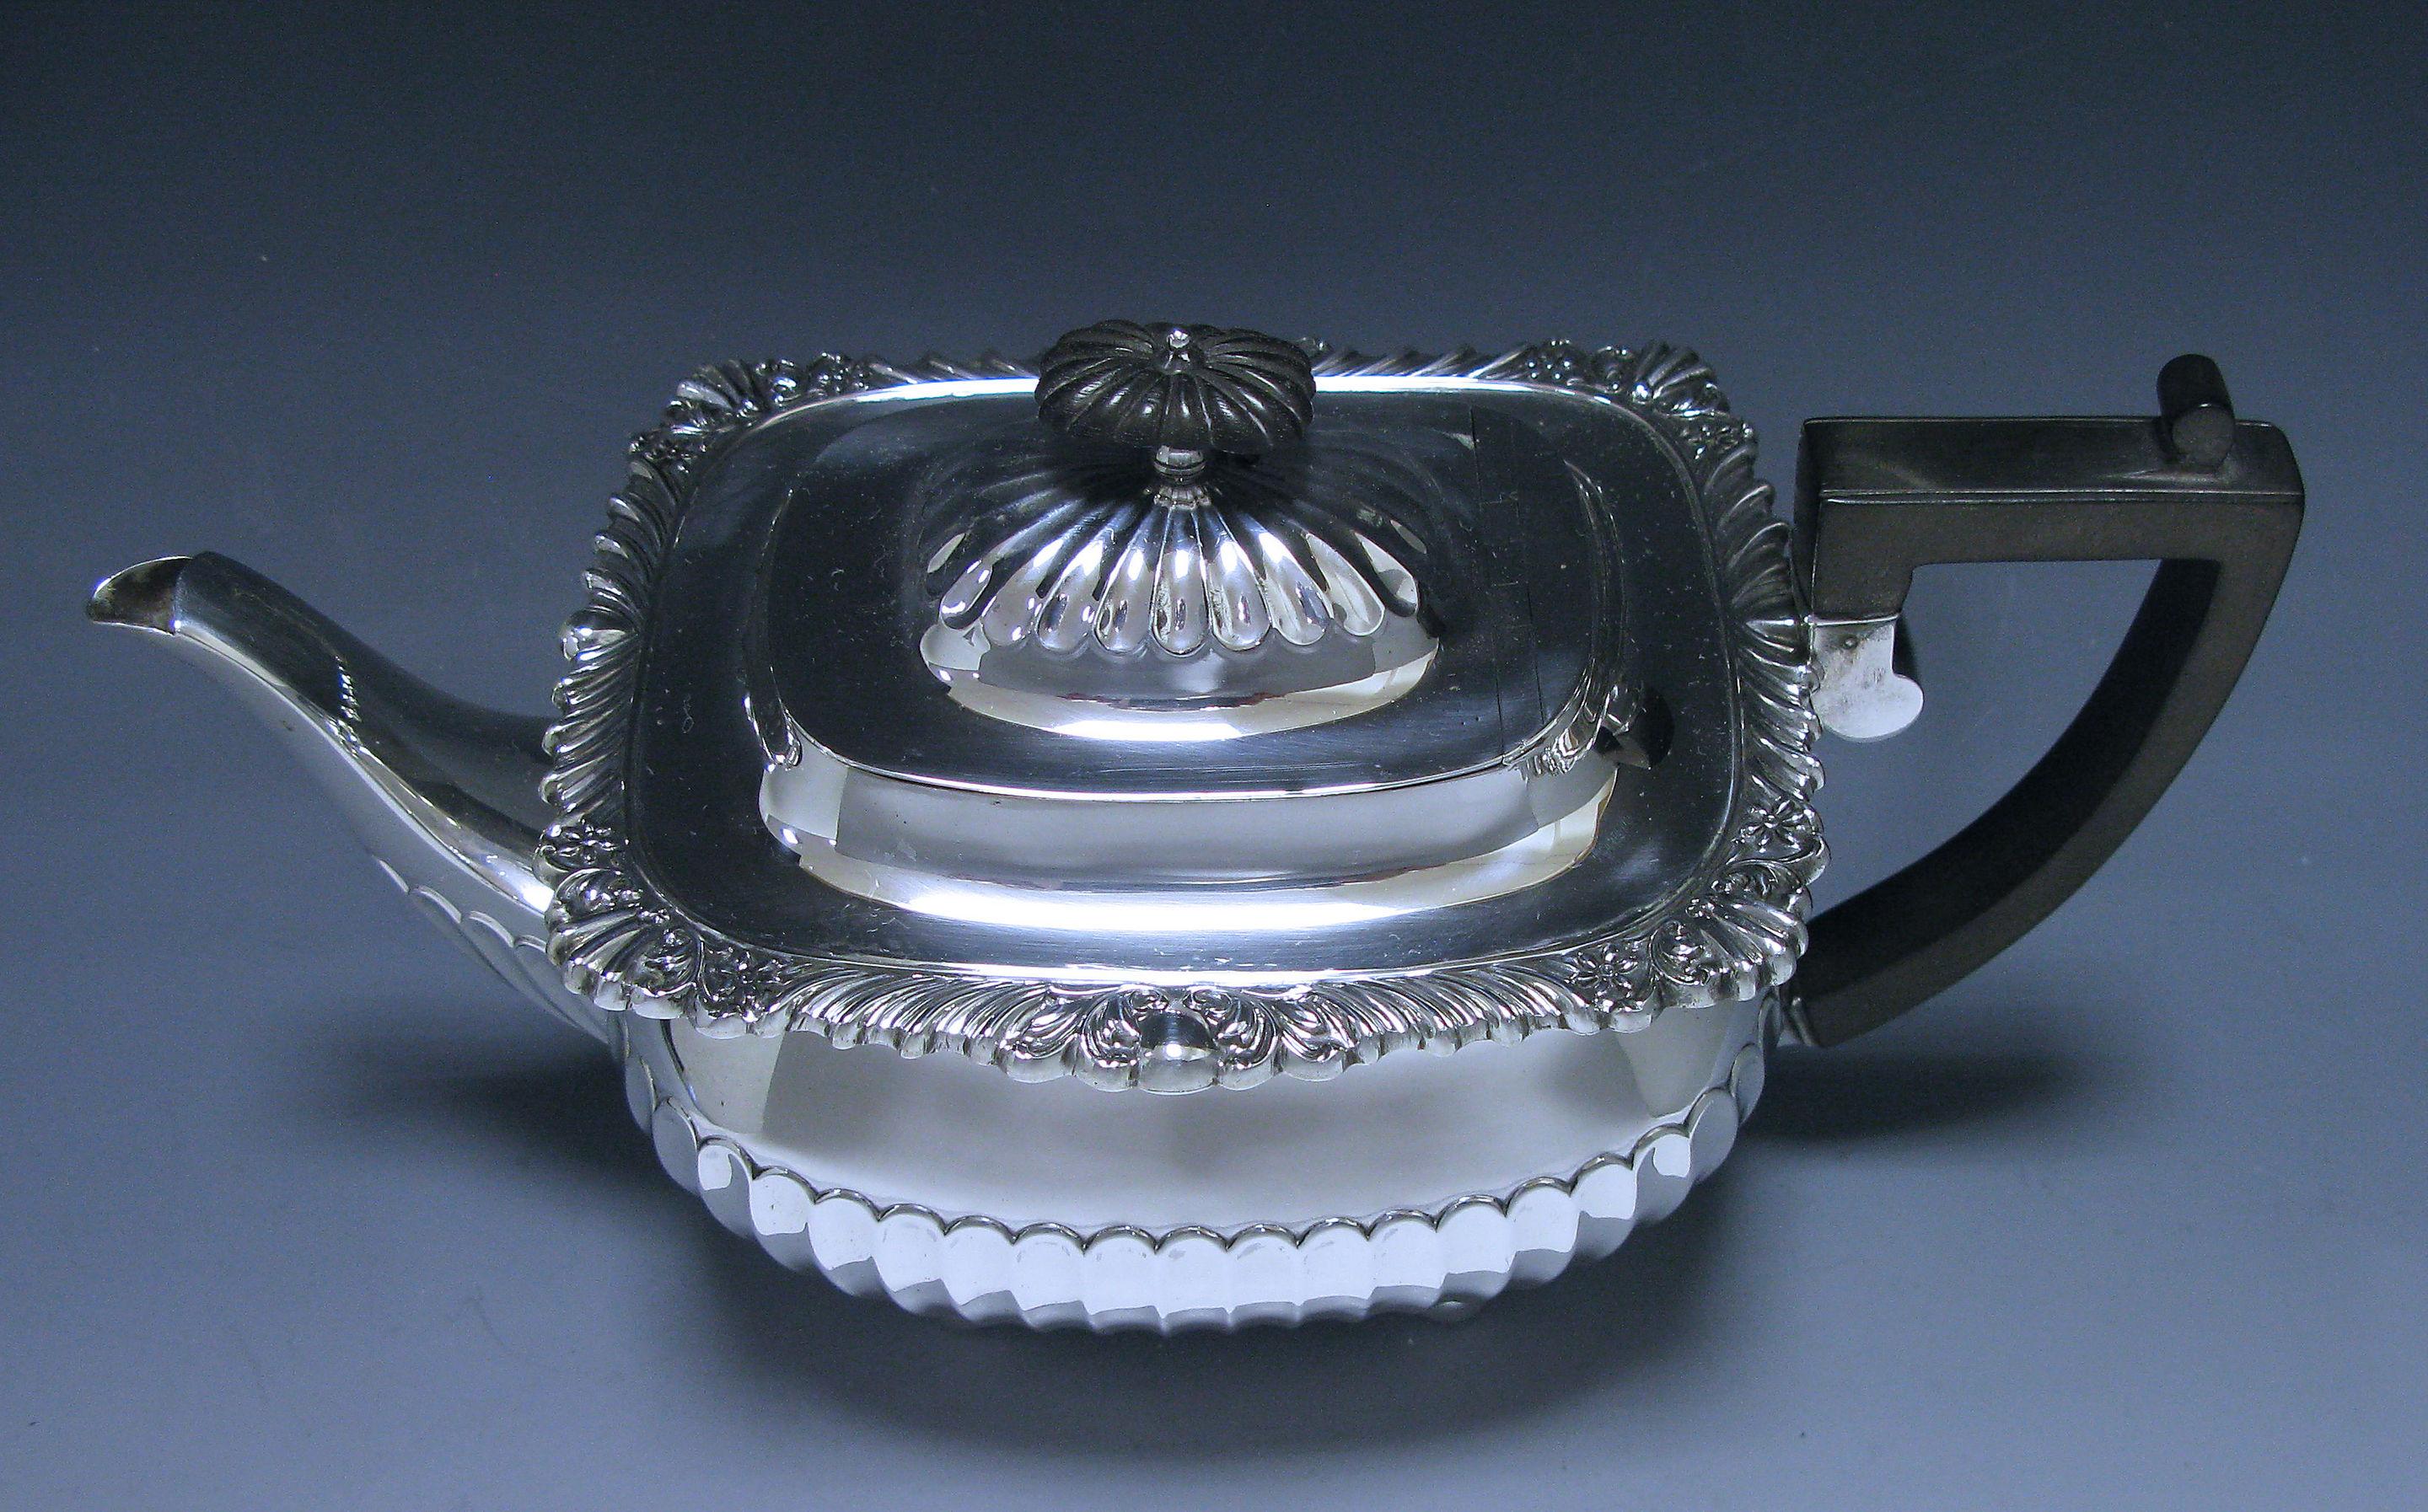 A charming antique sterling silver teapot made in the reign of Edward VII. The teapot is of rectangular form, with half fluting to the base which is repeated on the lid. The pot has a border of shell and scroll design to the top. The pot has a fruit